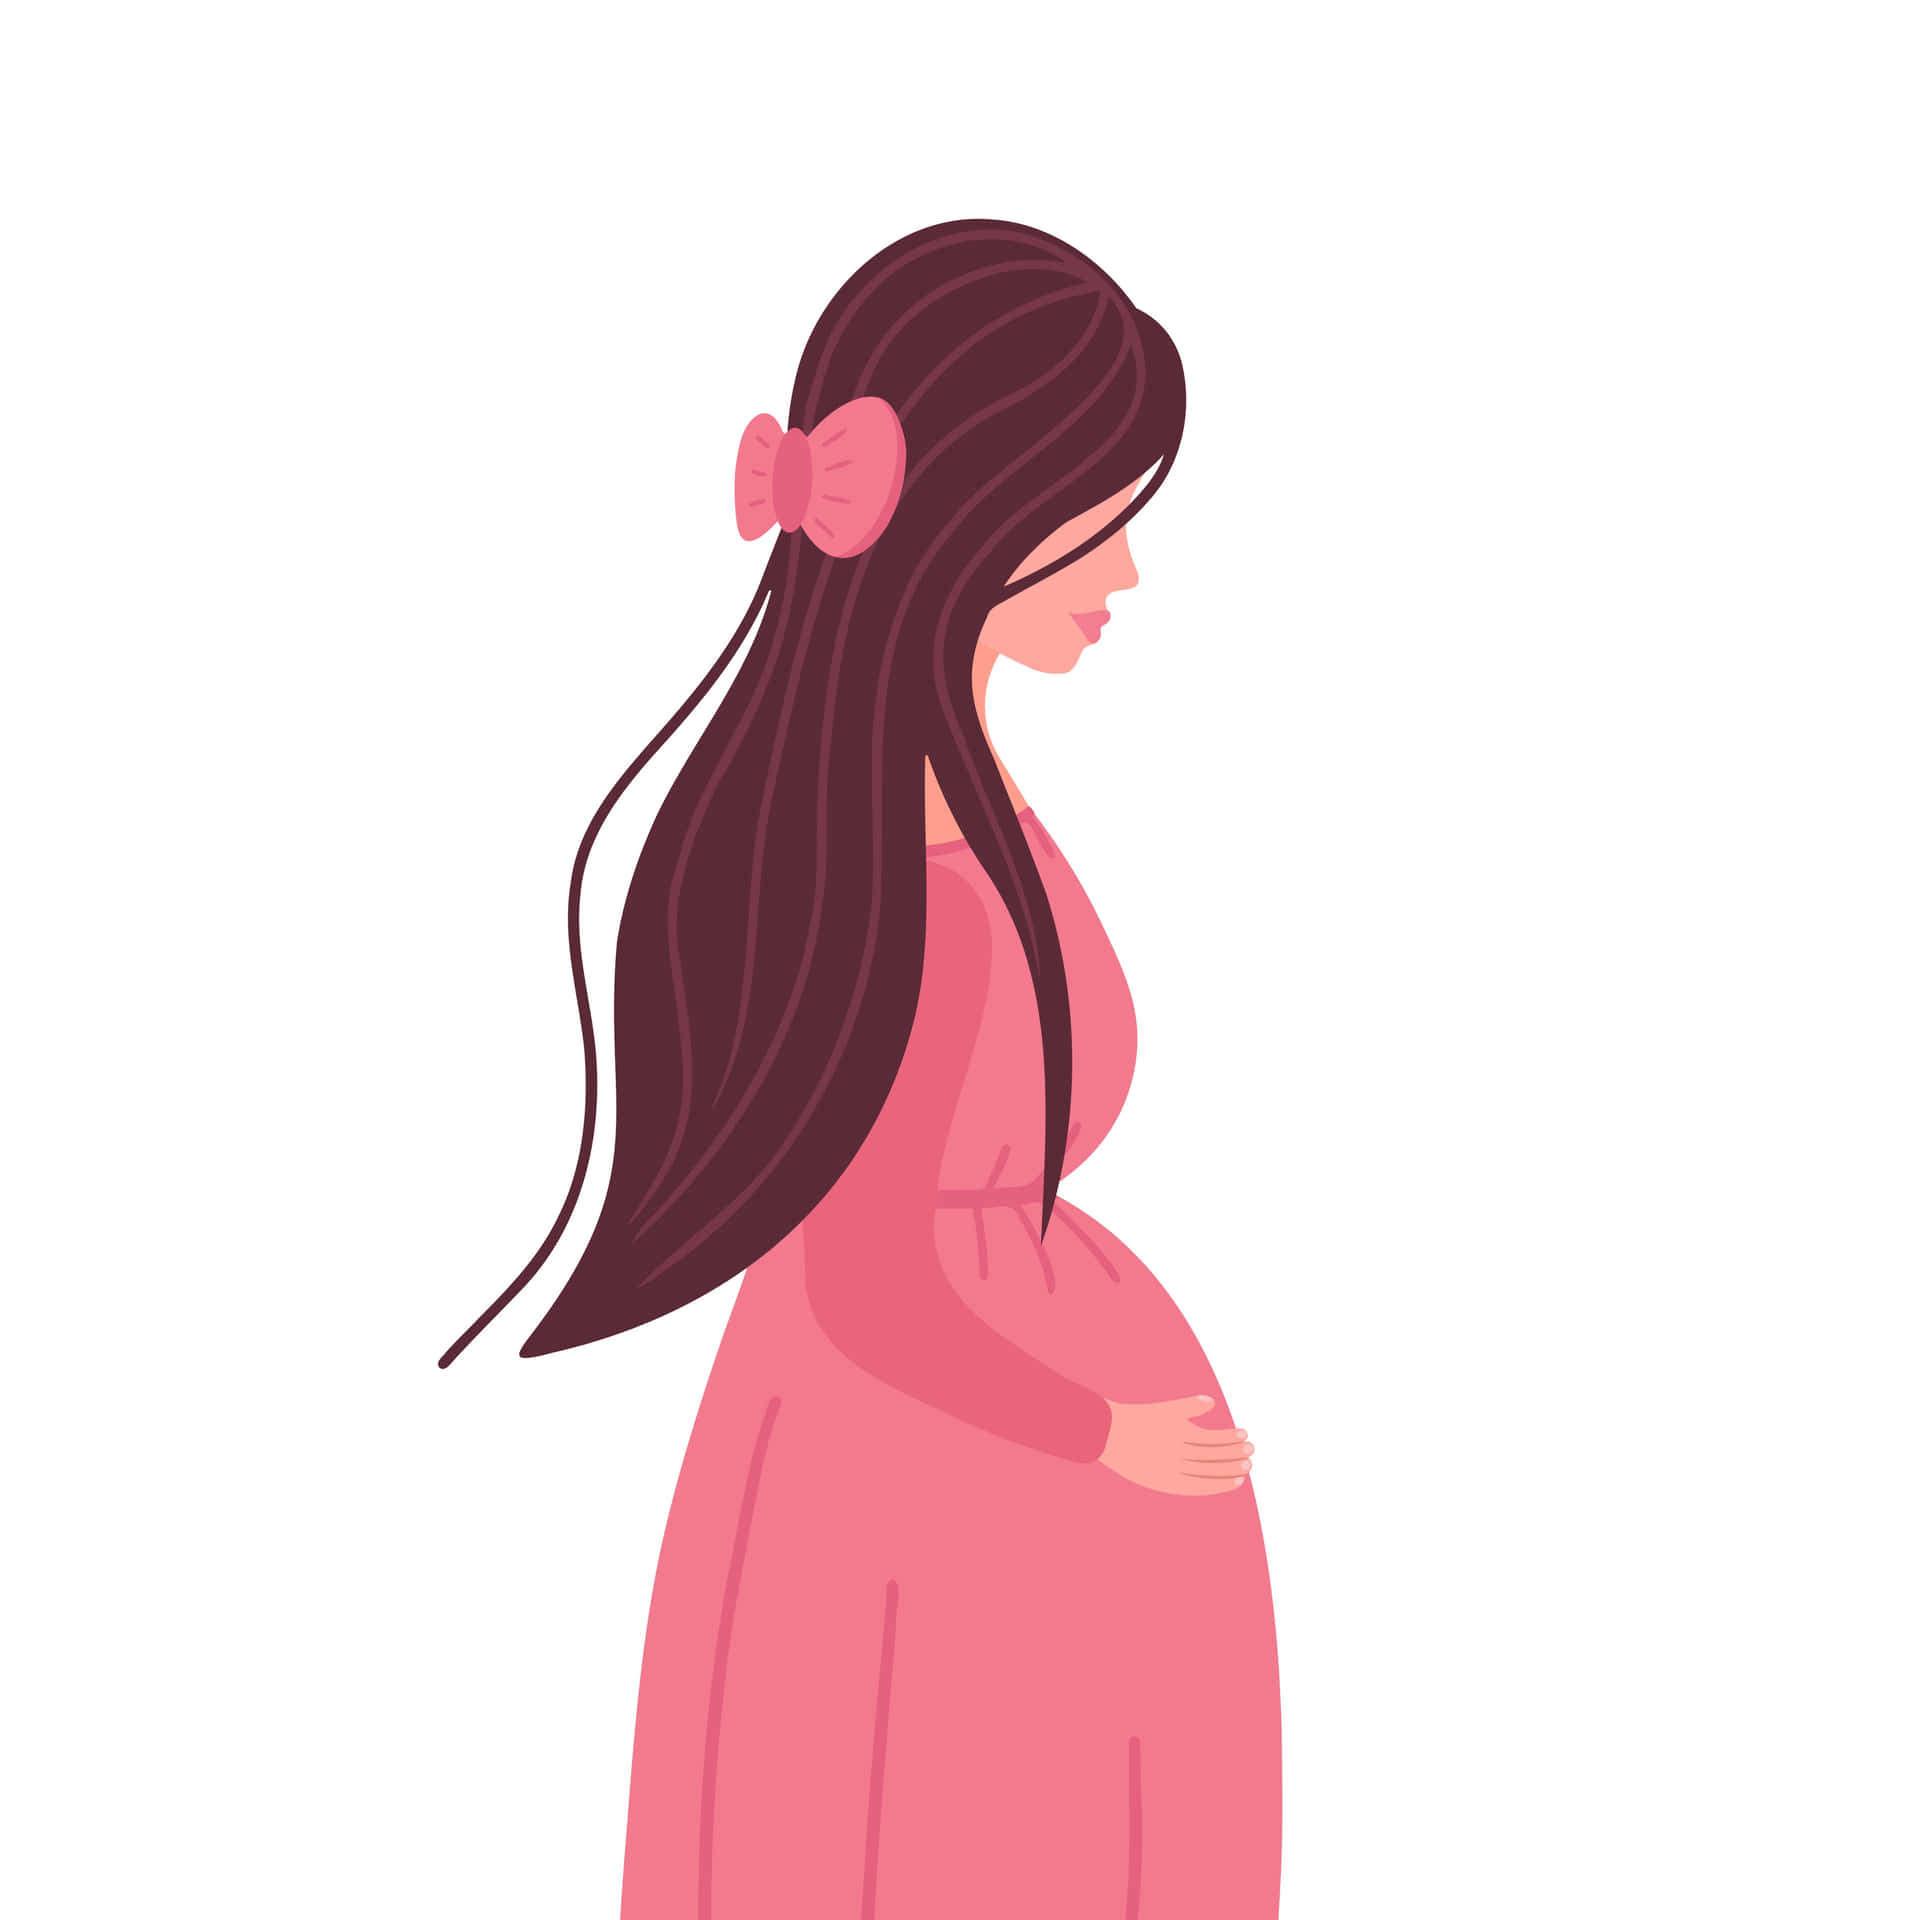 Pregnant Woman Holding Belly on a Sunny Day